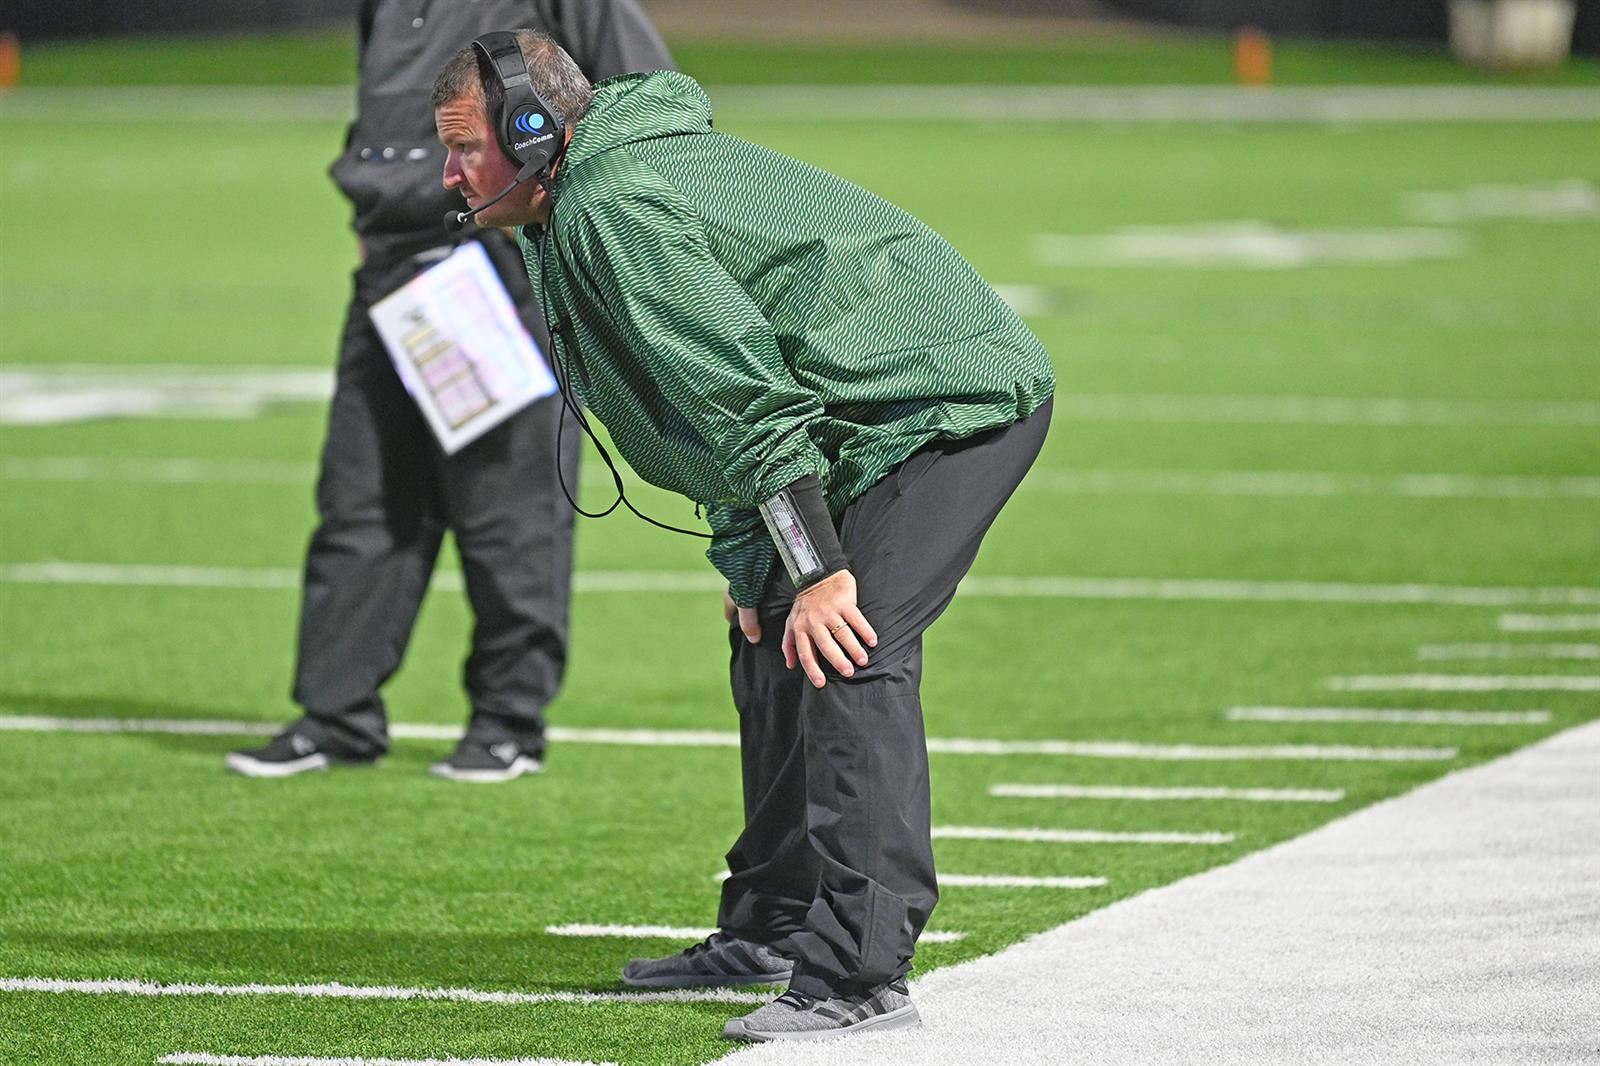 Cypress Falls High School Head Football Coach Chris Brister was voted the District 16-6A Coach of the Year.